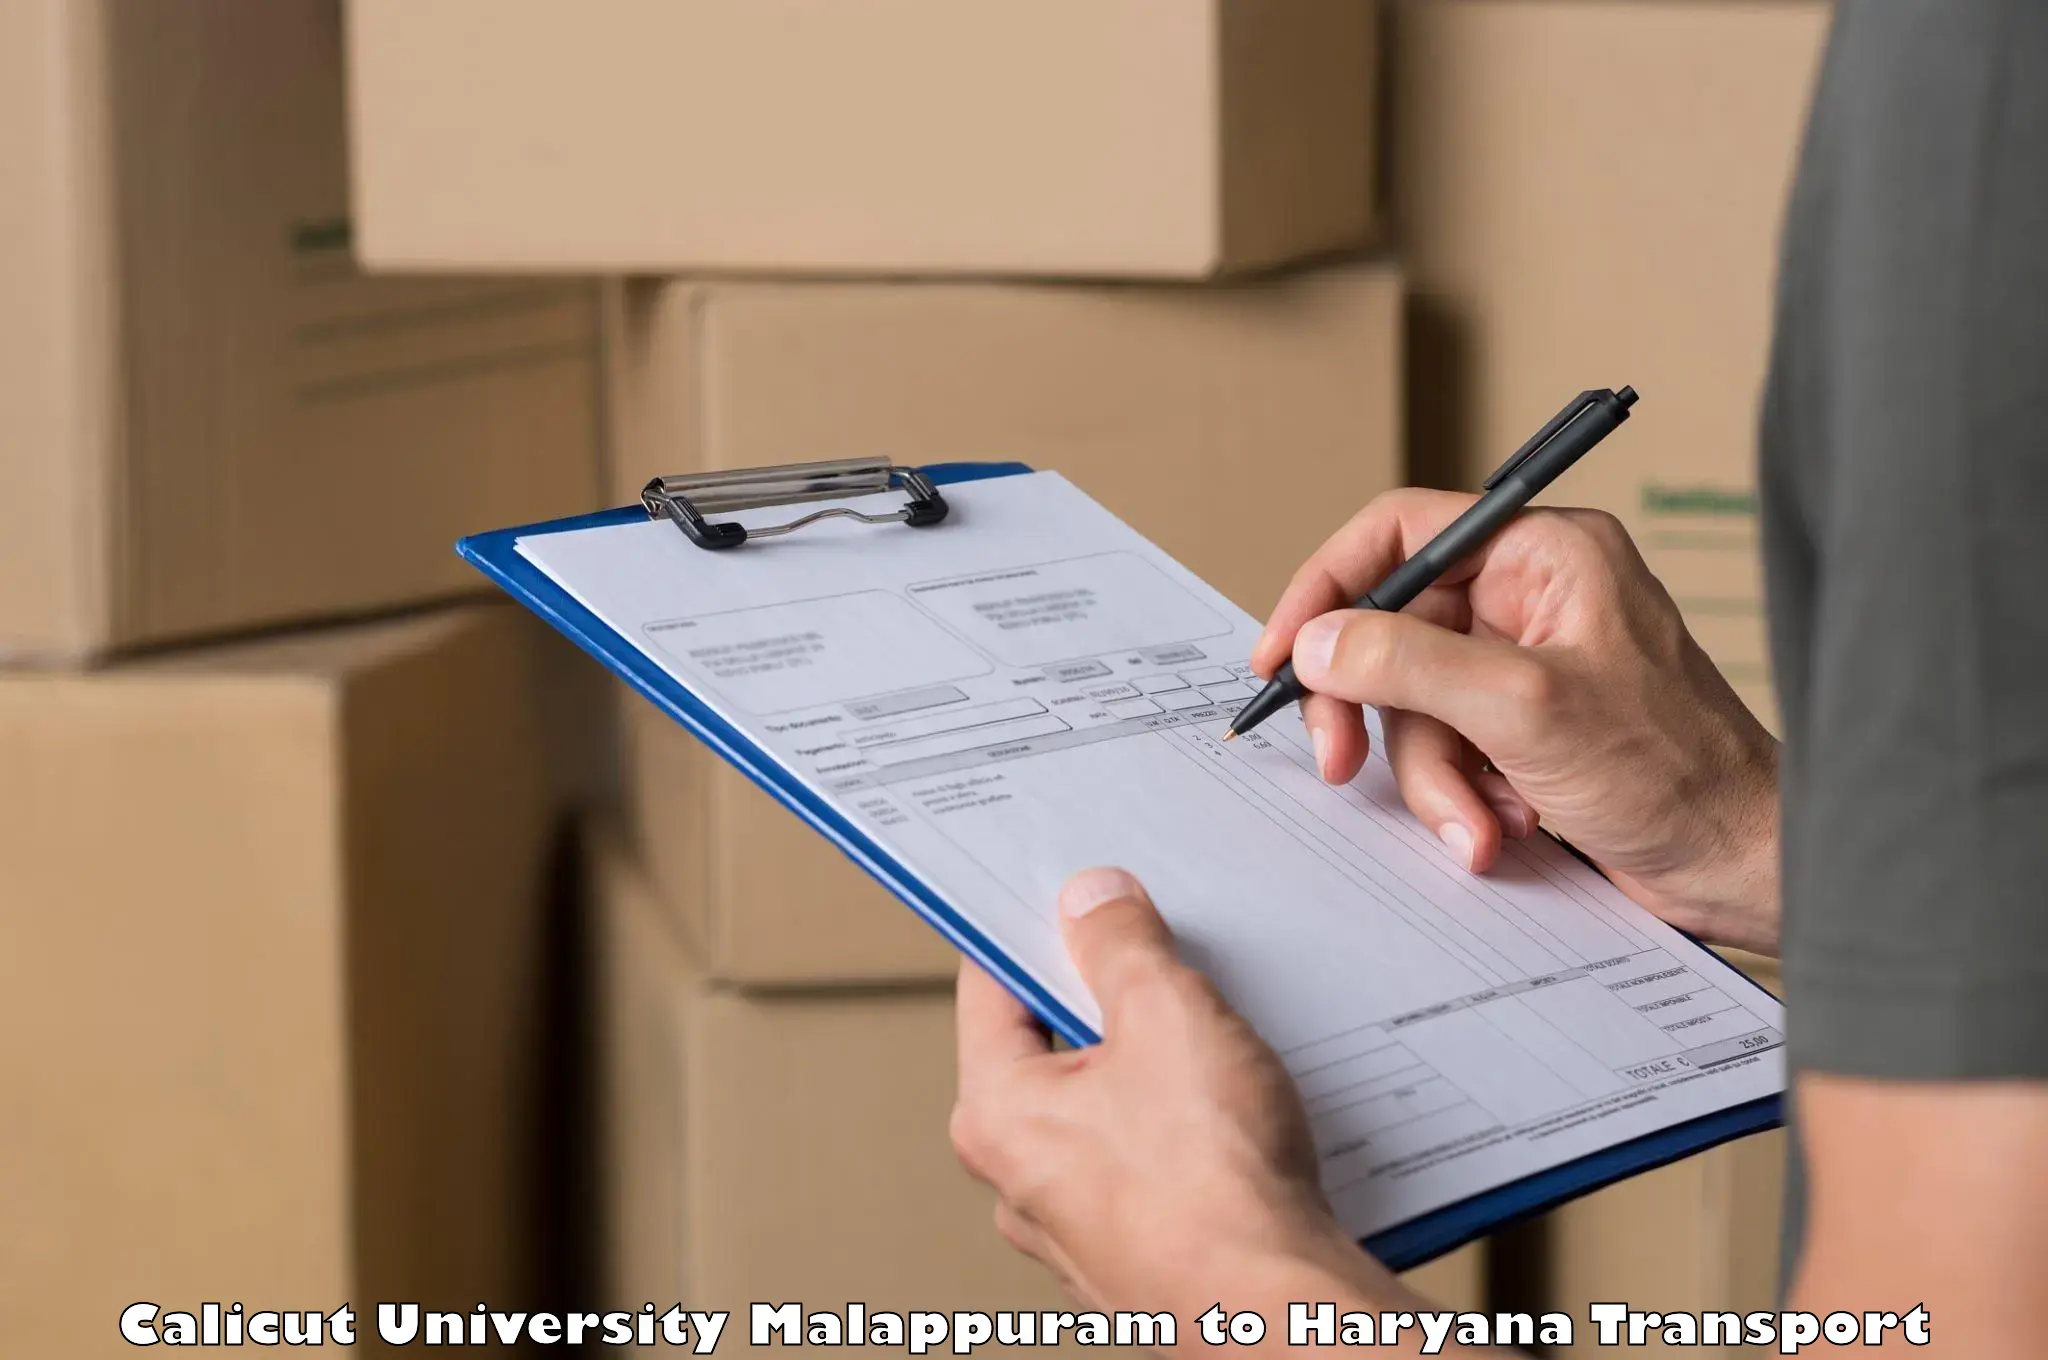 Package delivery services Calicut University Malappuram to Siwani